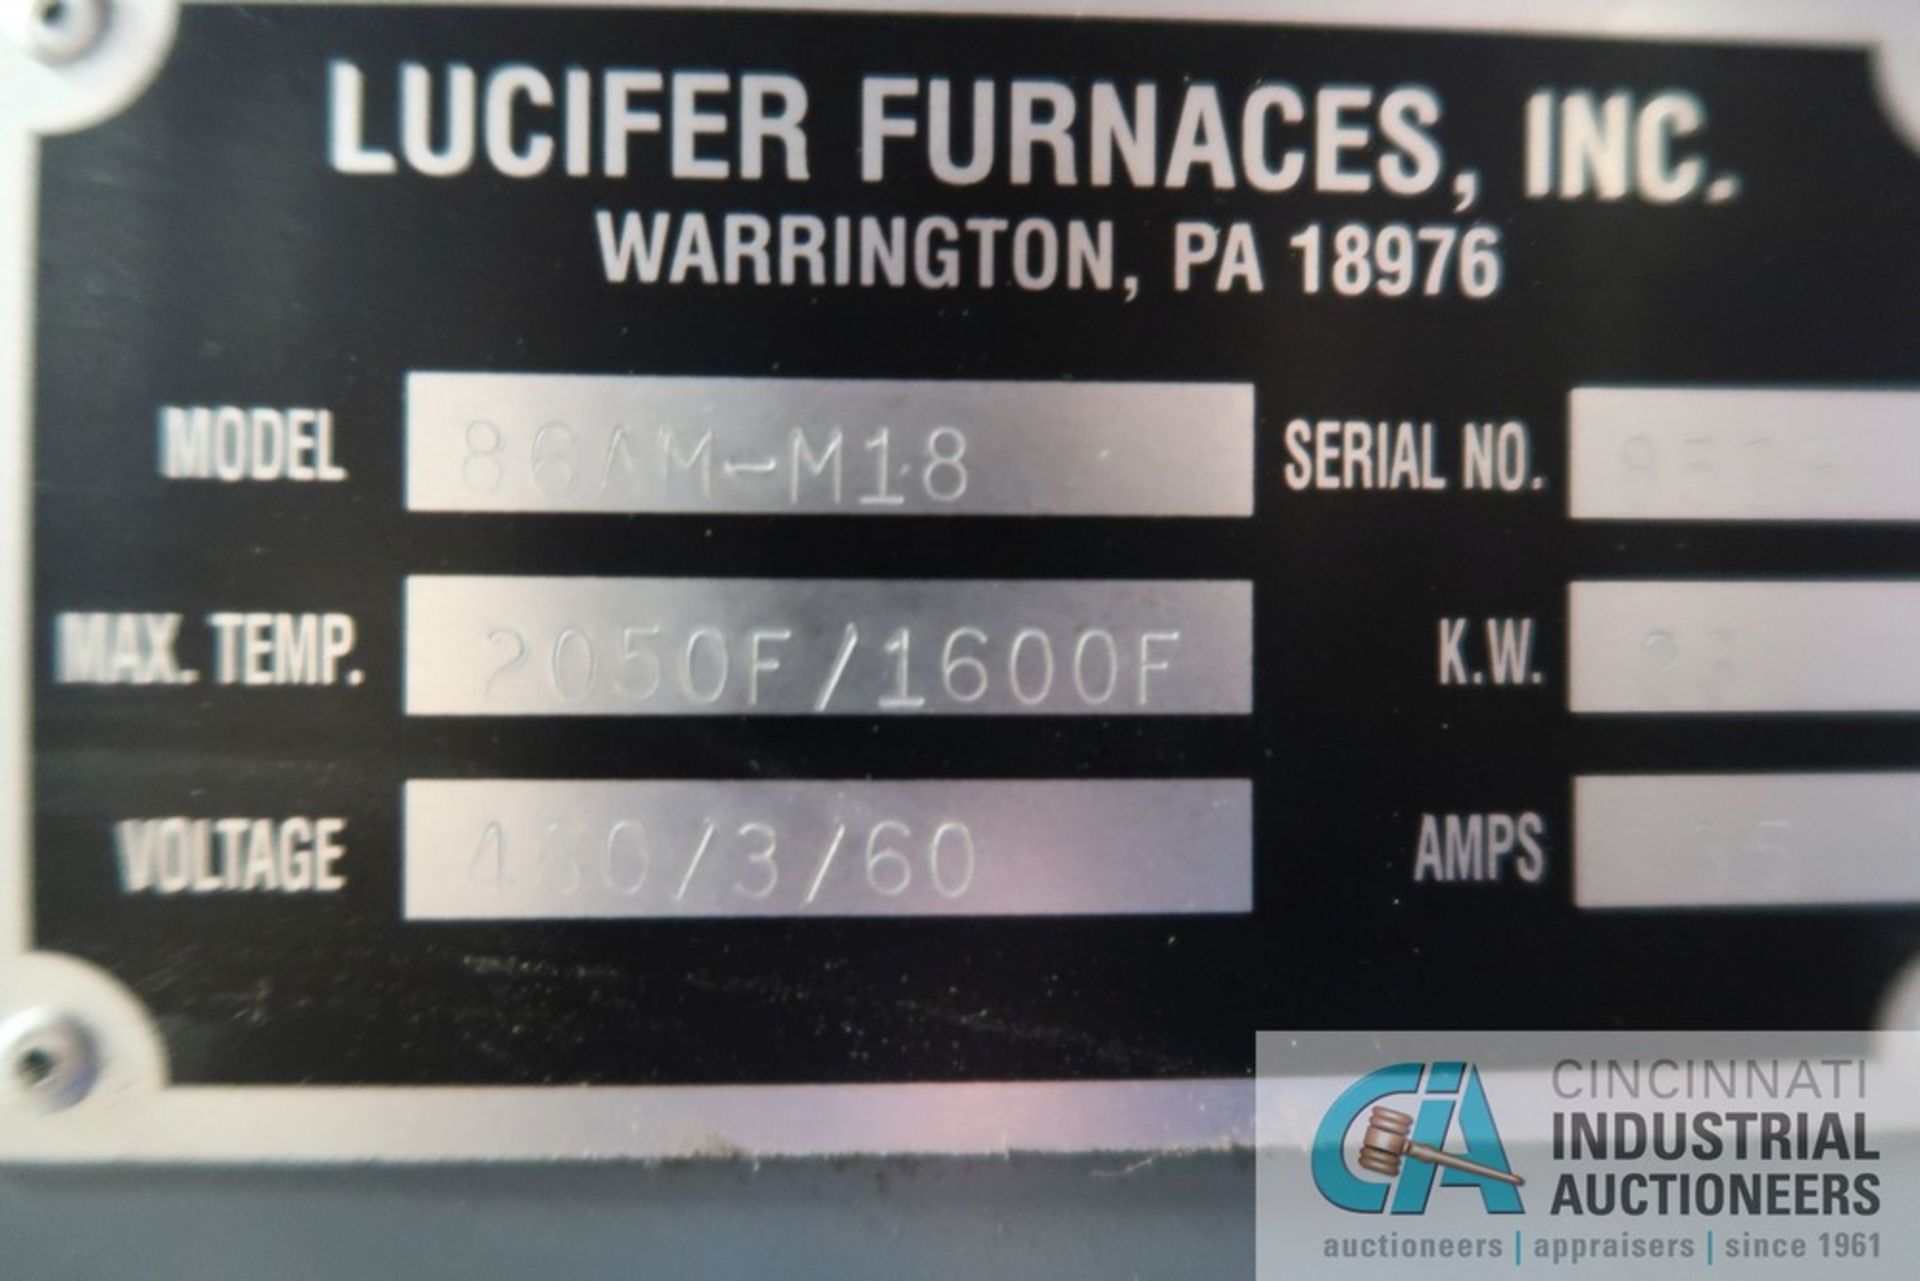 LUCIFER FURNACES MODEL 86AM-M18 NATURAL GAS HEAT TREAT OVEN; S/N 8528, 2,050 DEGREE F / 1,600 DEGREE - Image 9 of 14